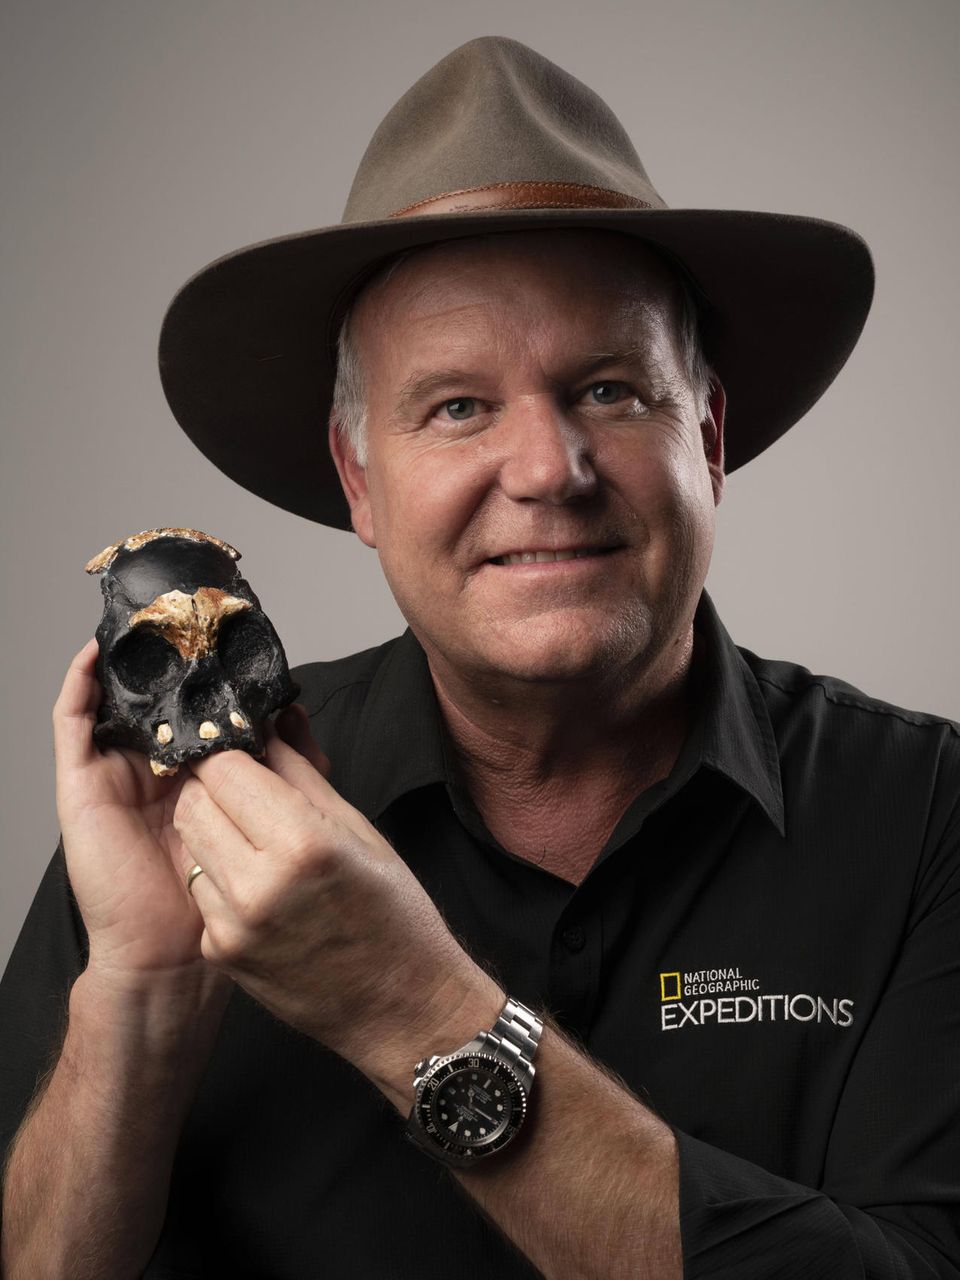 (4 Nov 2021) An international team of researchers, led by Professor Lee Berger from Wits University, has today (4 Nov) revealed the first partial skull of a Homo naledi child that was found in the remote depths of the Rising Star Cave in the Cradle of Humankind World Heritage Site near Johannesburg, South Africa. Describing the skull and its context in two separate papers in the Open Access journal, PaleoAnthropology, the team of 21 researchers from Wits University and thirteen other universities announced the discovery of parts of the skull and teeth of the child that died almost 250,000 years ago when it was approximately four to six years old. The first paper, of which Professor Juliet Brophy of Wits and Louisiana State Universities PUBLICATIONxNOTxINxUKxFRA Copyright: xx 50845837